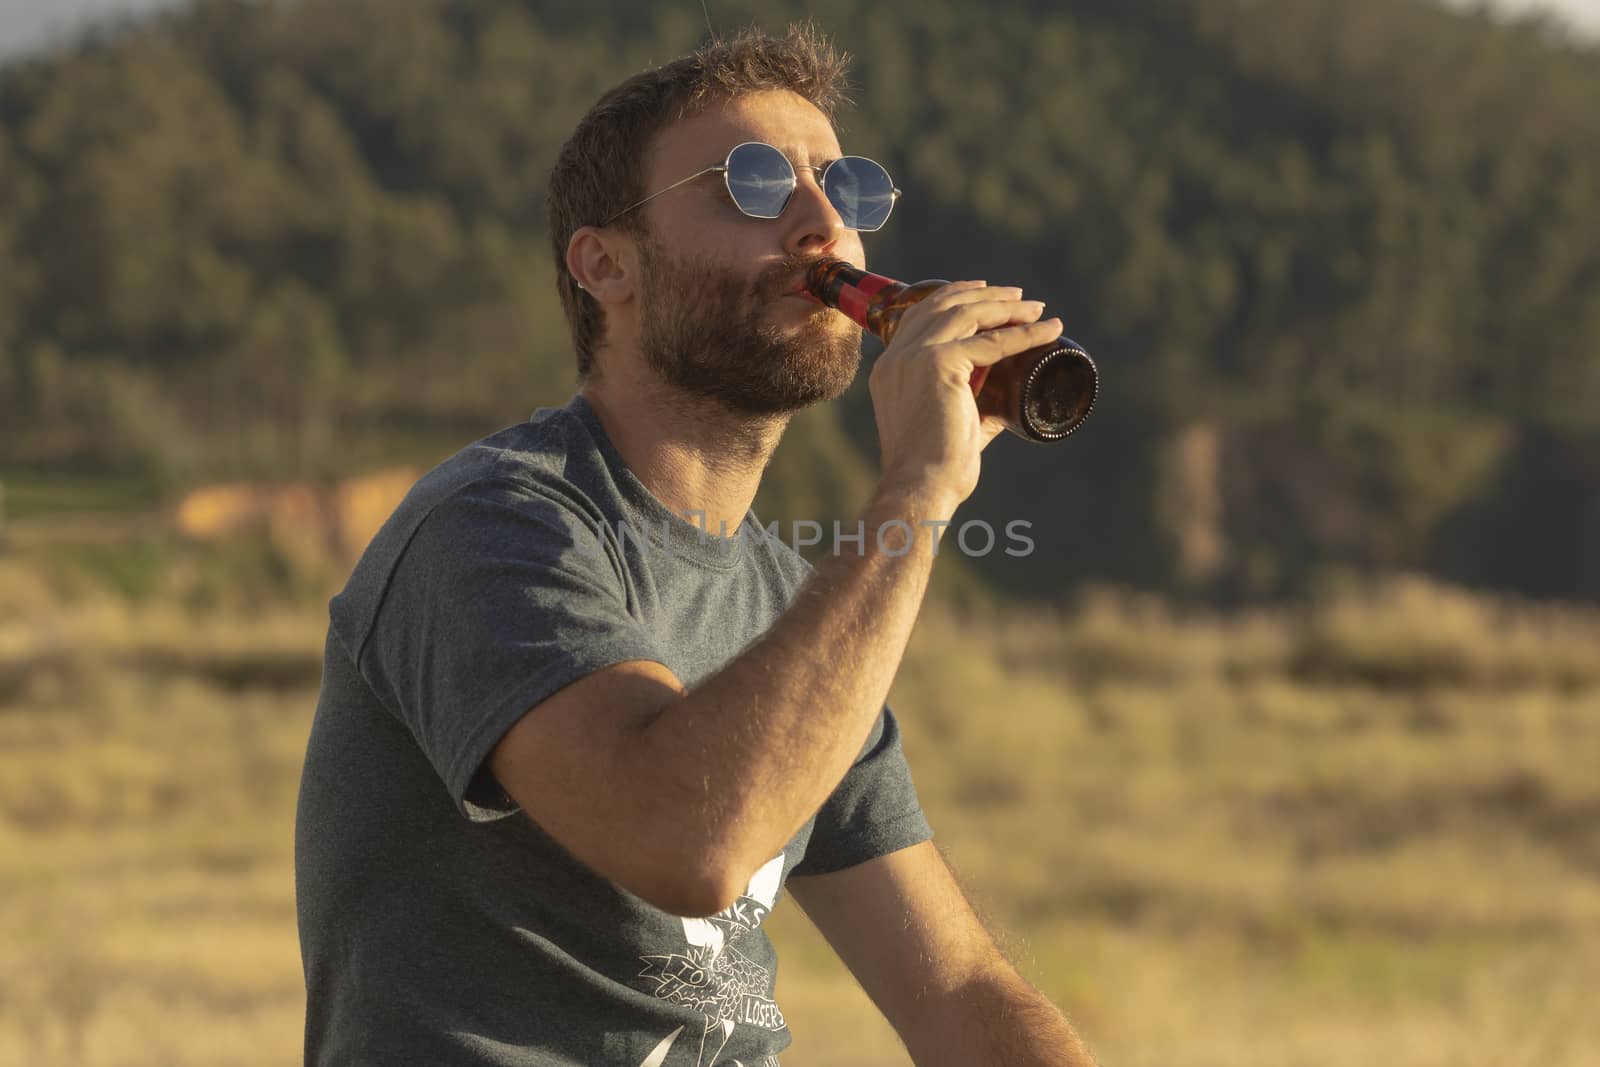 A young man, with glasses and a beard, drinks beer from a bottle, while enjoying the landscape and the sunset, in Galicia, northern Spain.